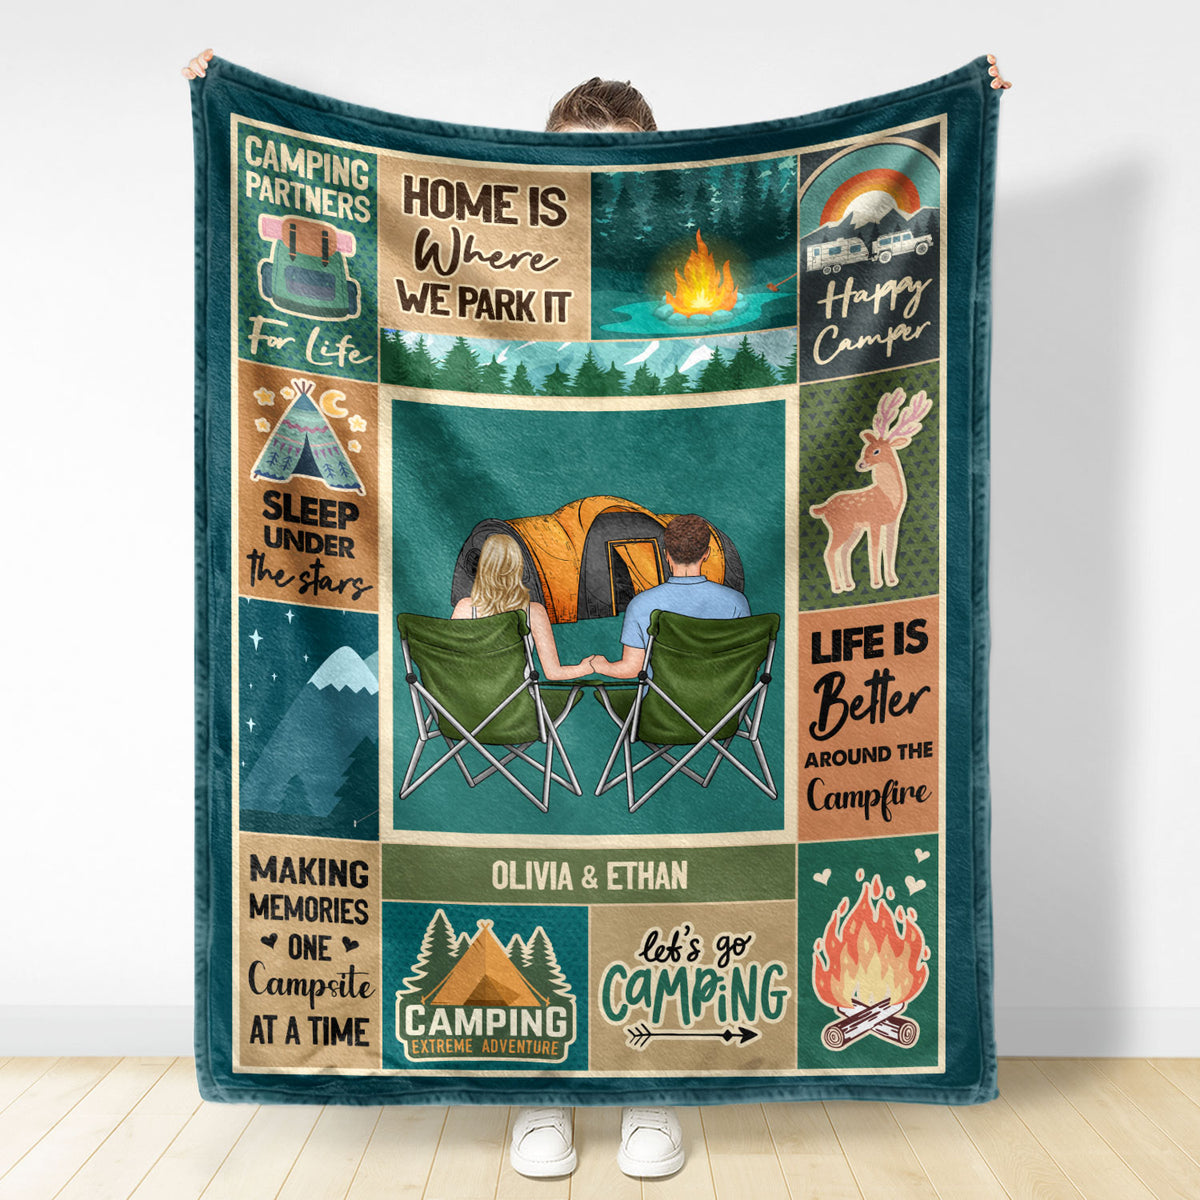 Life is Better Around the Camp Fire with Tents on Camping 20oz